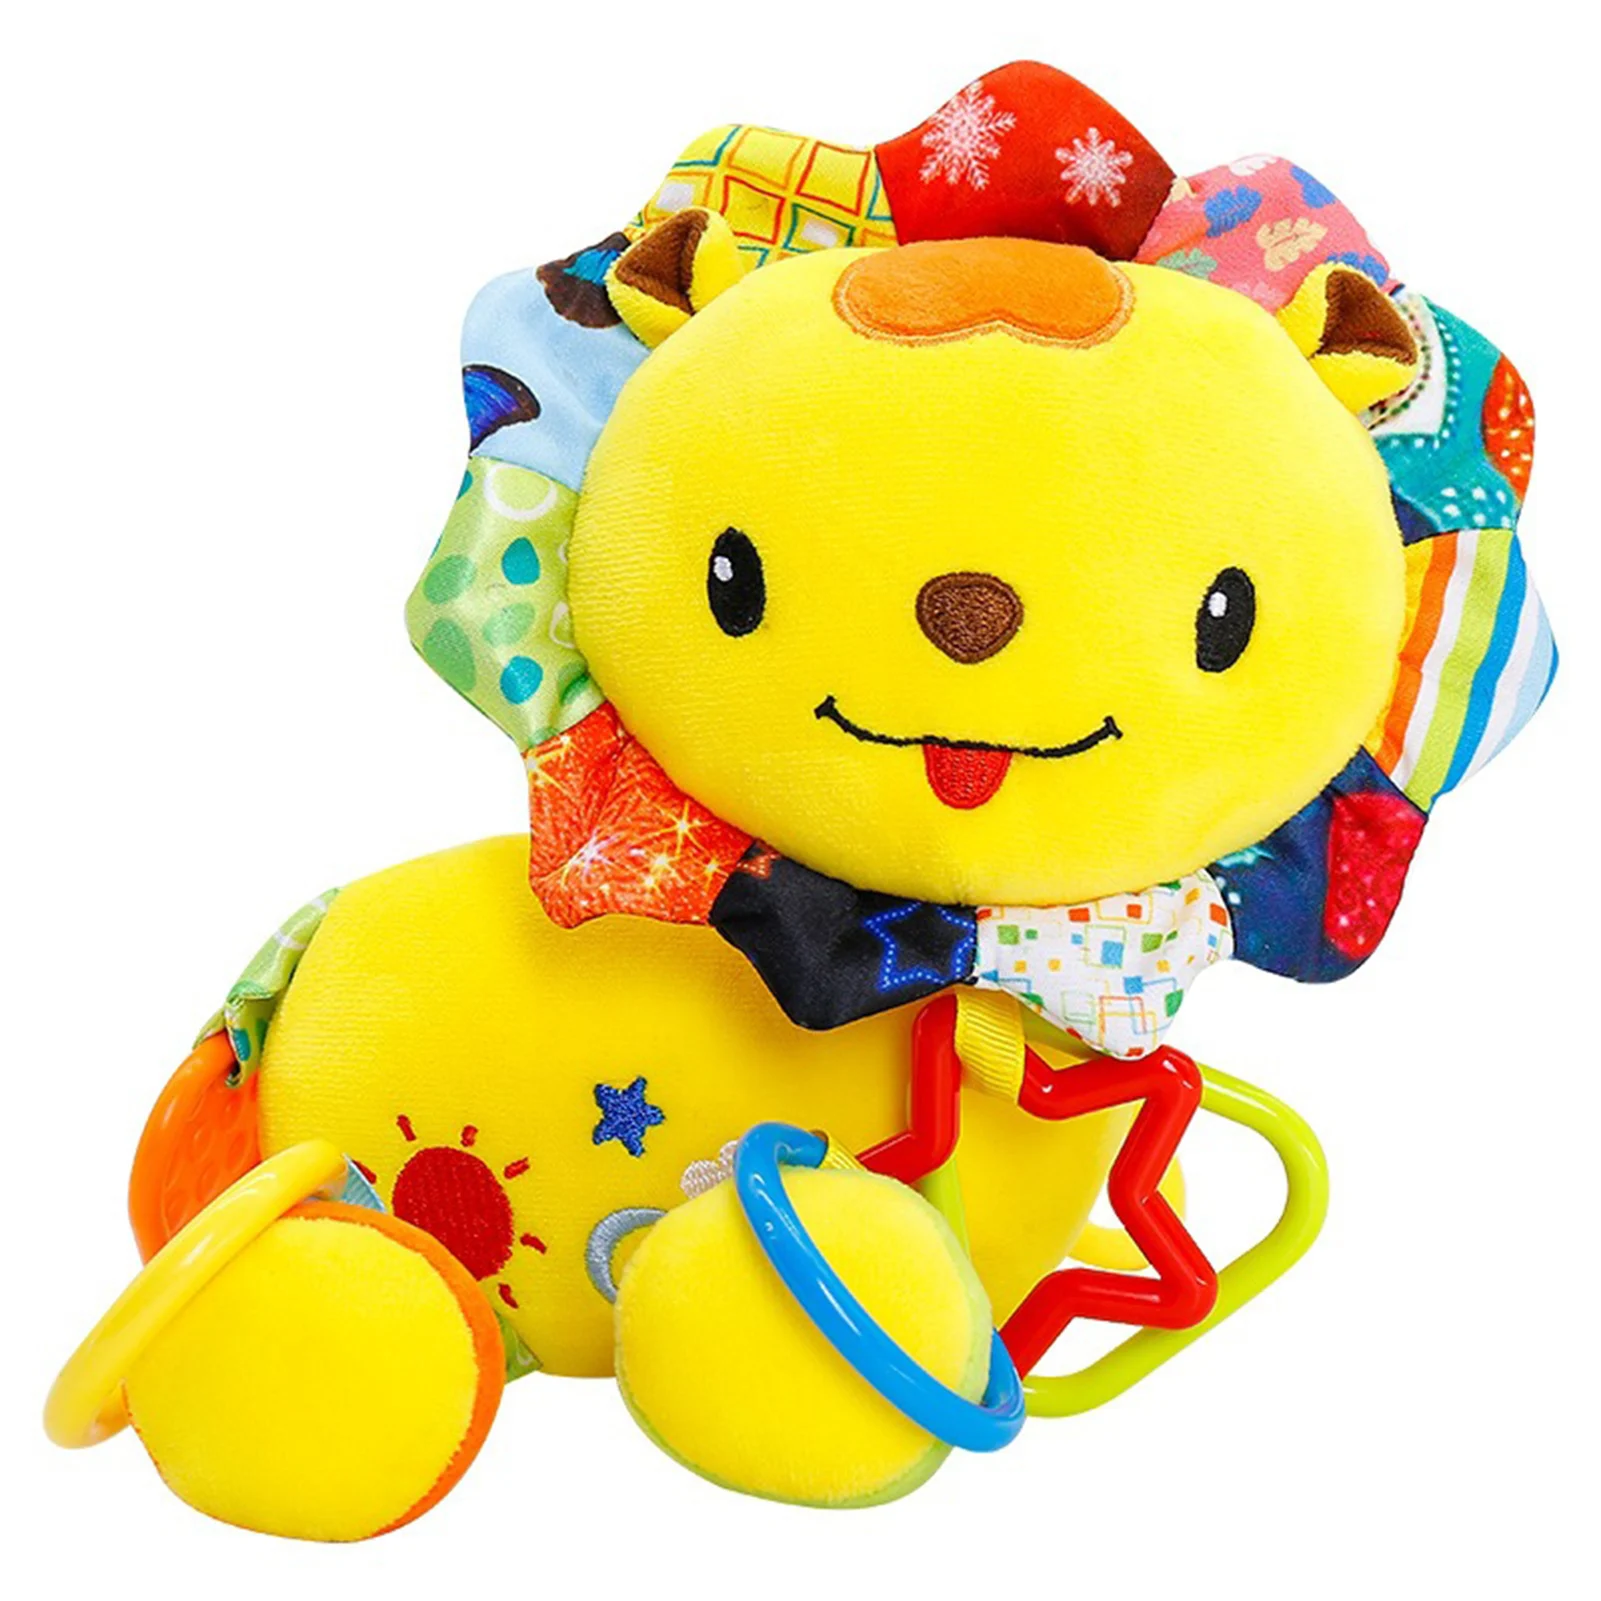 

Car Seat Baby Teething Toys Baby Rattle 0-6 Months Newborn Toys Hanging Rattles For Newborn Lion Plush Rattles Sensory Baby Toy